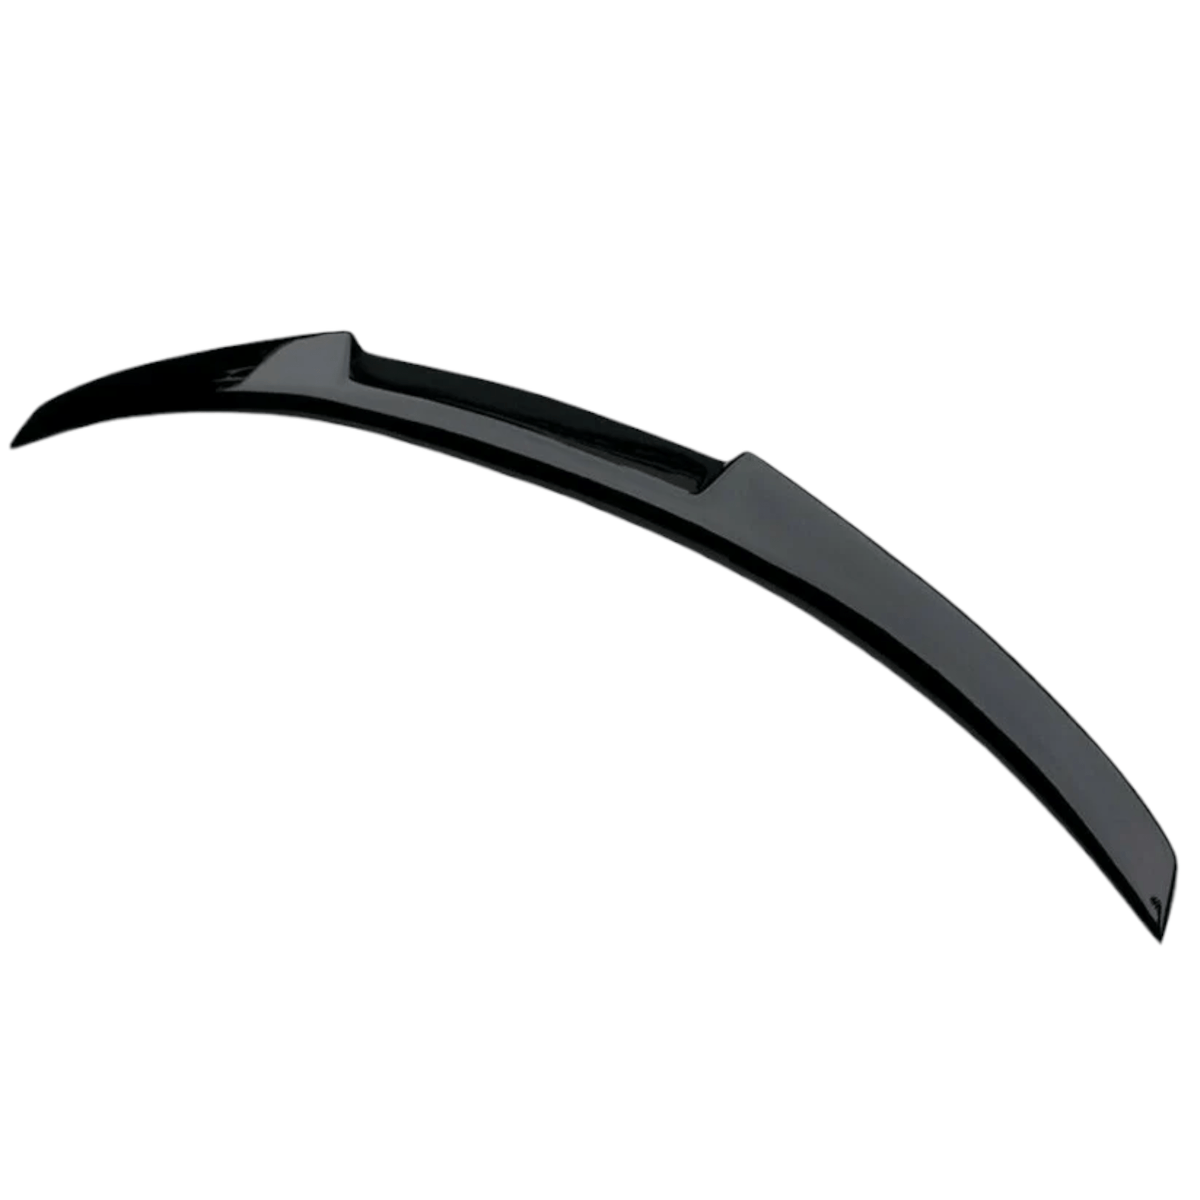 BMW Boot Spoiler 3 Series F30 F80 Rear trunk lid boot spoiler V M4 Style gloss black abs